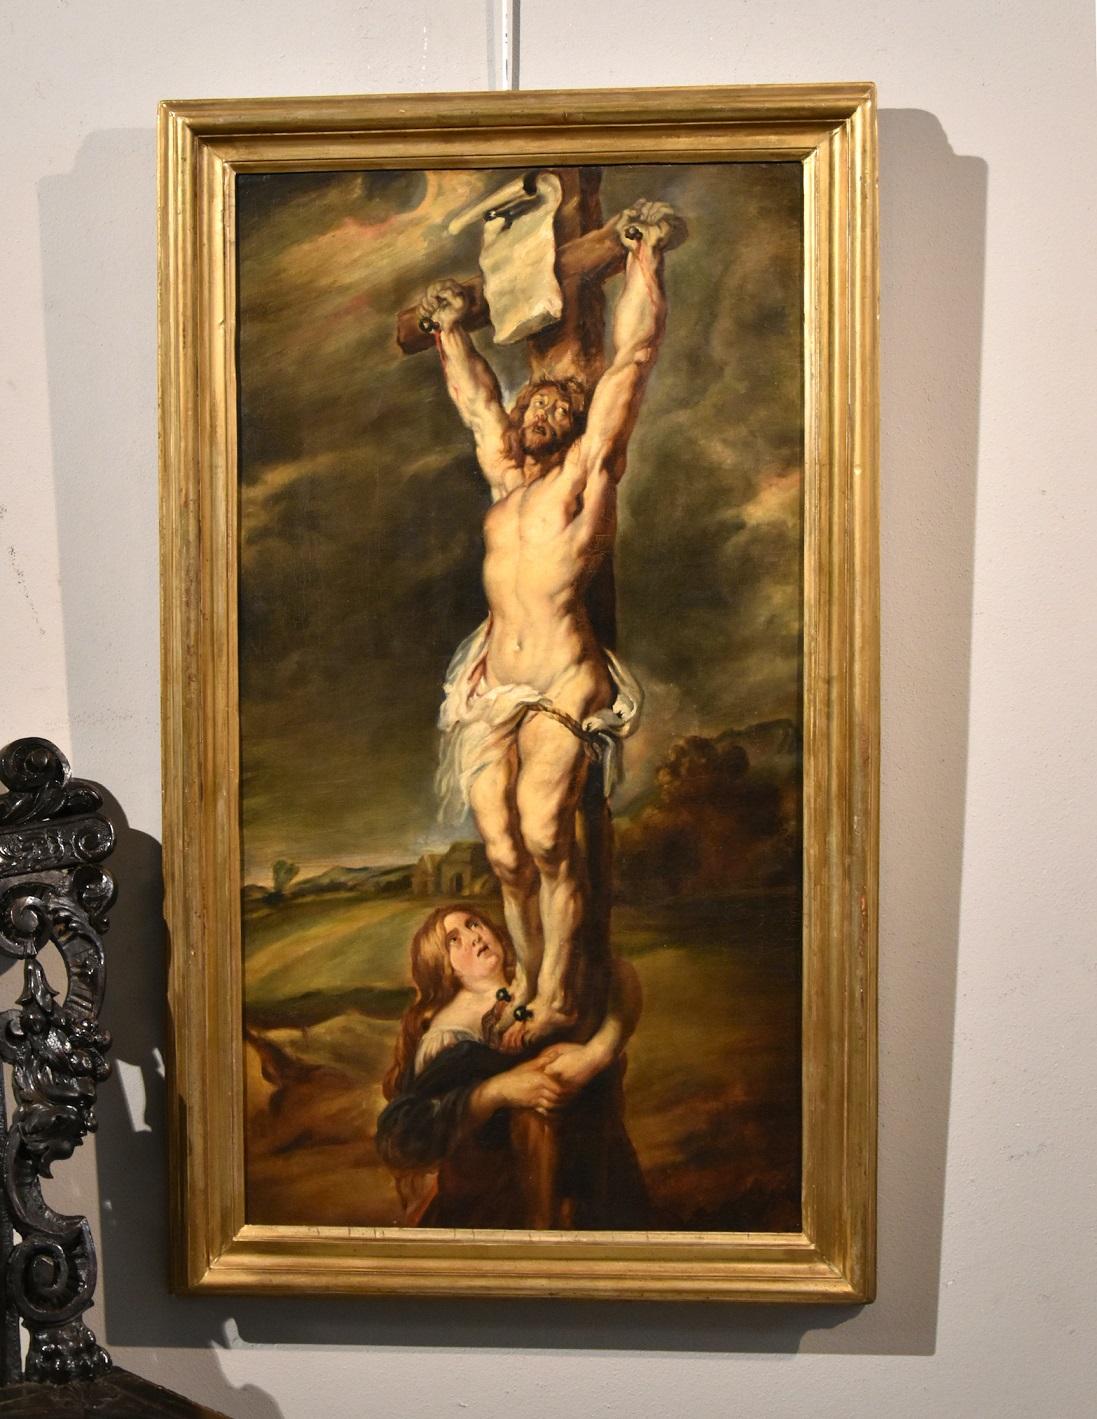 Christ Crucified Rubens Paint Oil on canvas Old master 17th Century Religious 8